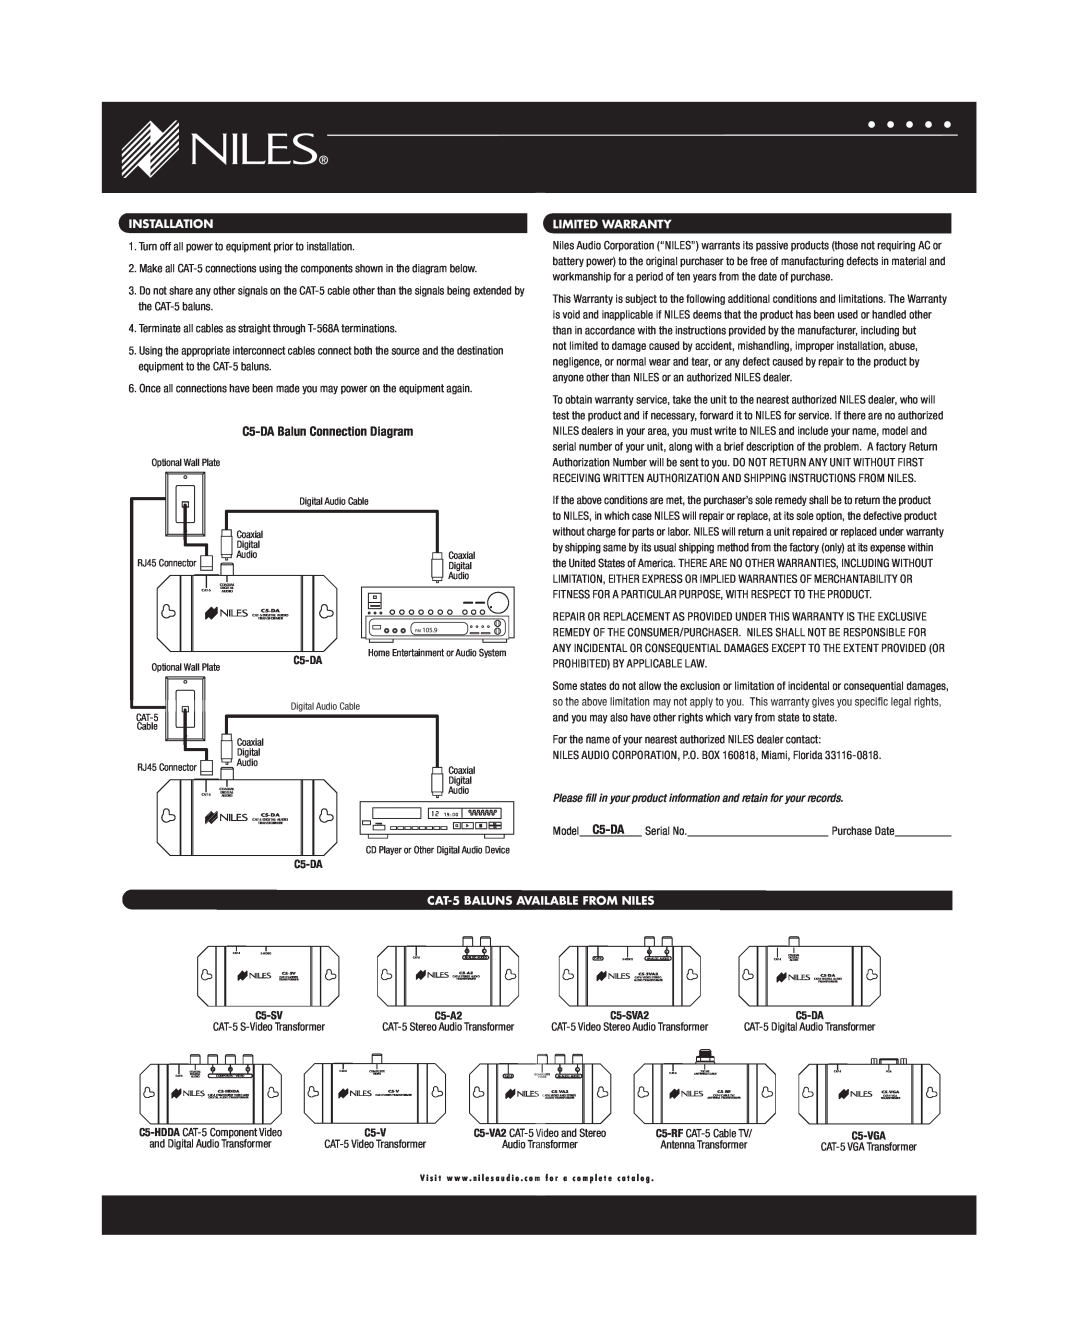 Niles Audio warranty Installation, Limited Warranty, CAT-5BALUNS AVAILABLE FROM NILES, C5-DABalun Connection Diagram 